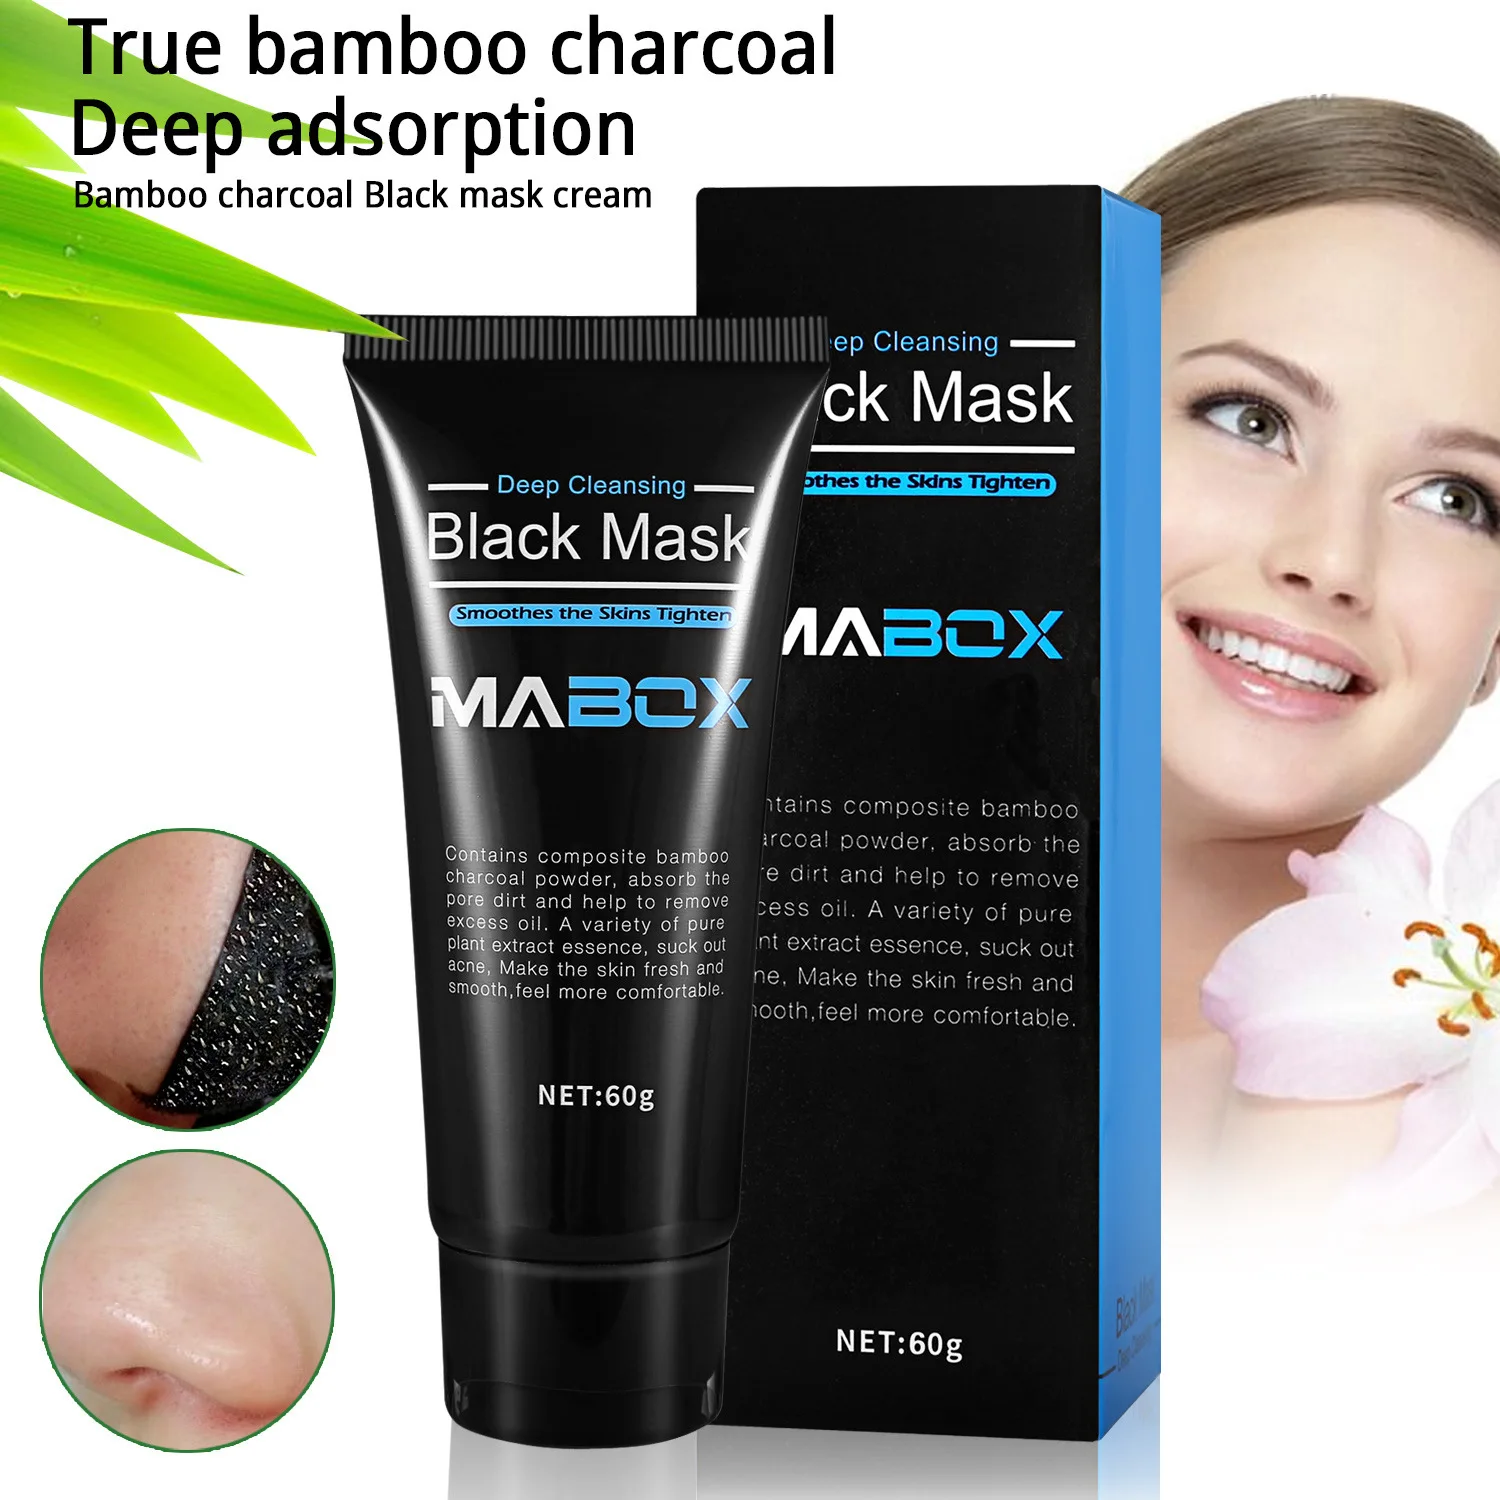 Black Mask Peel off Mask, Charcoal Purifying Blackhead Remover Mask Deep Cleansing for Acne Blemishes Organic Activated Charcoal